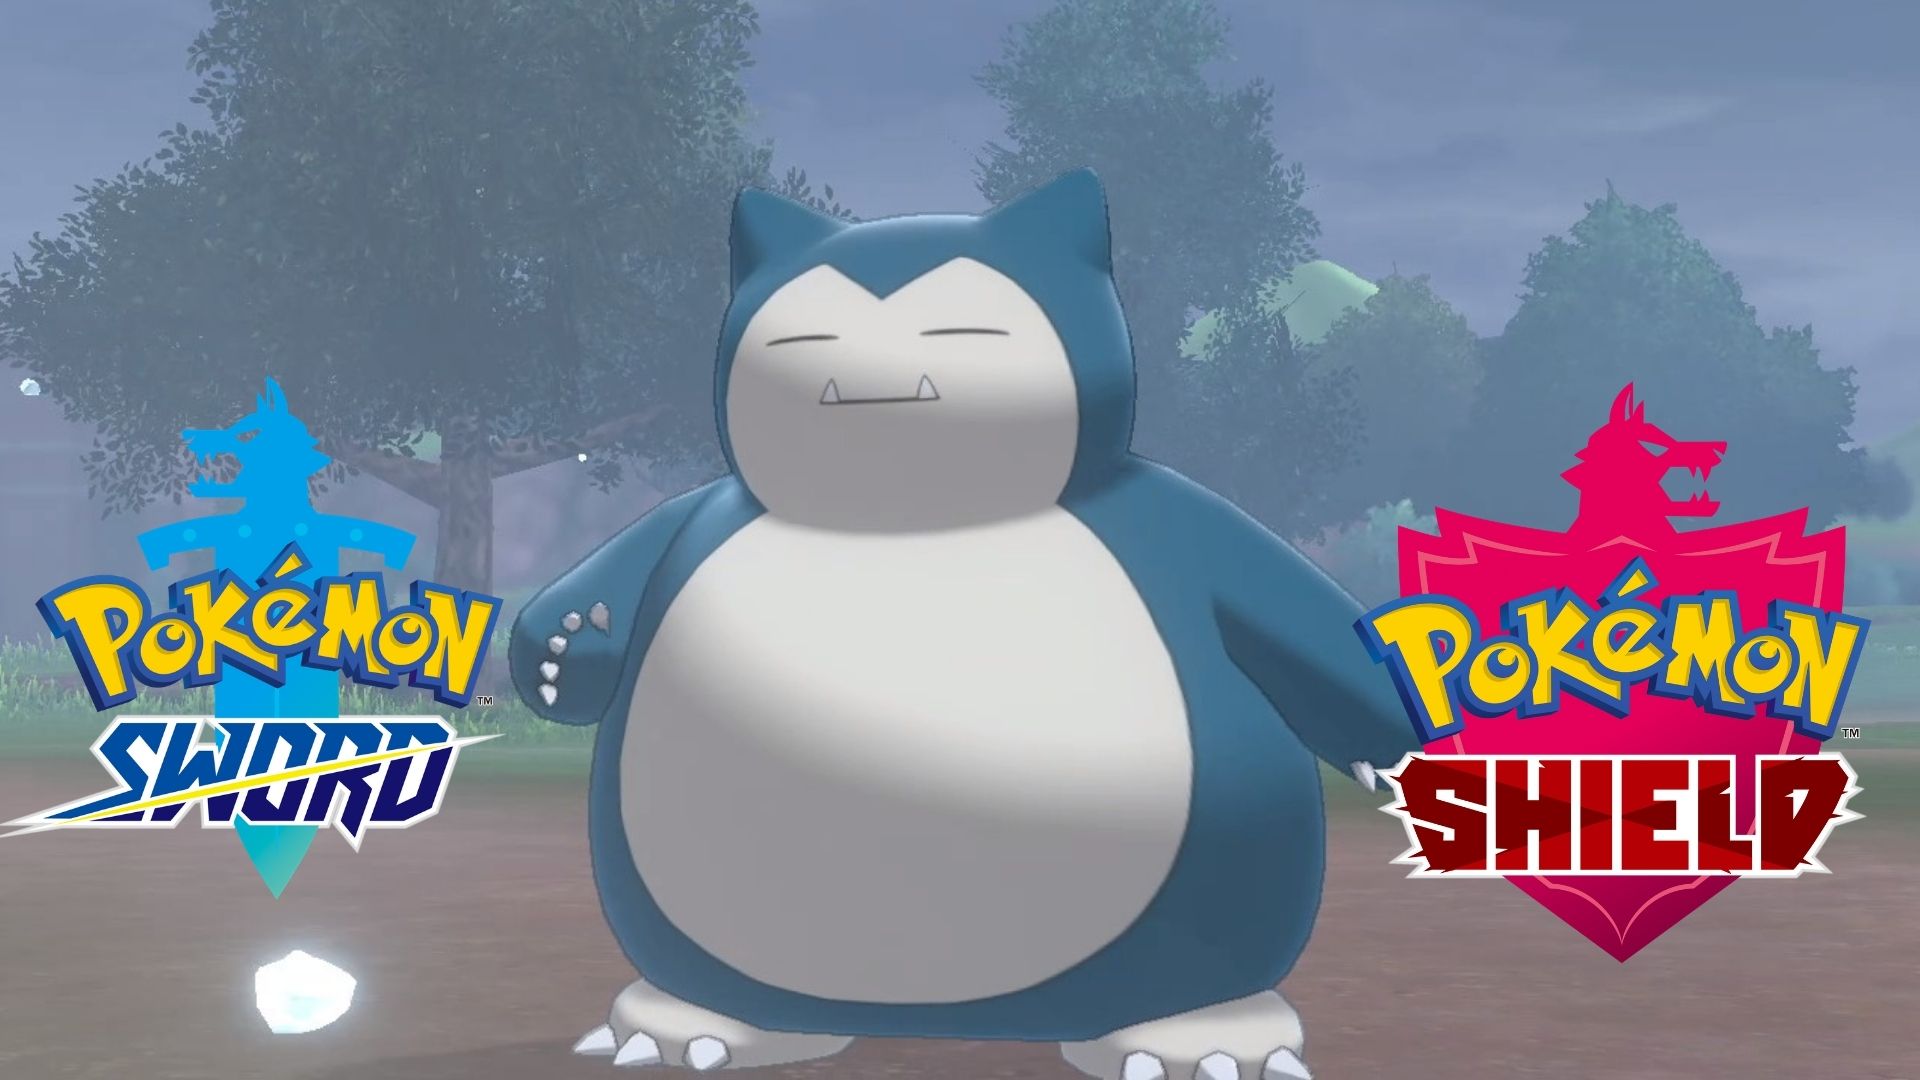 How to get Snorlax in Pokemon Sword &  Shield